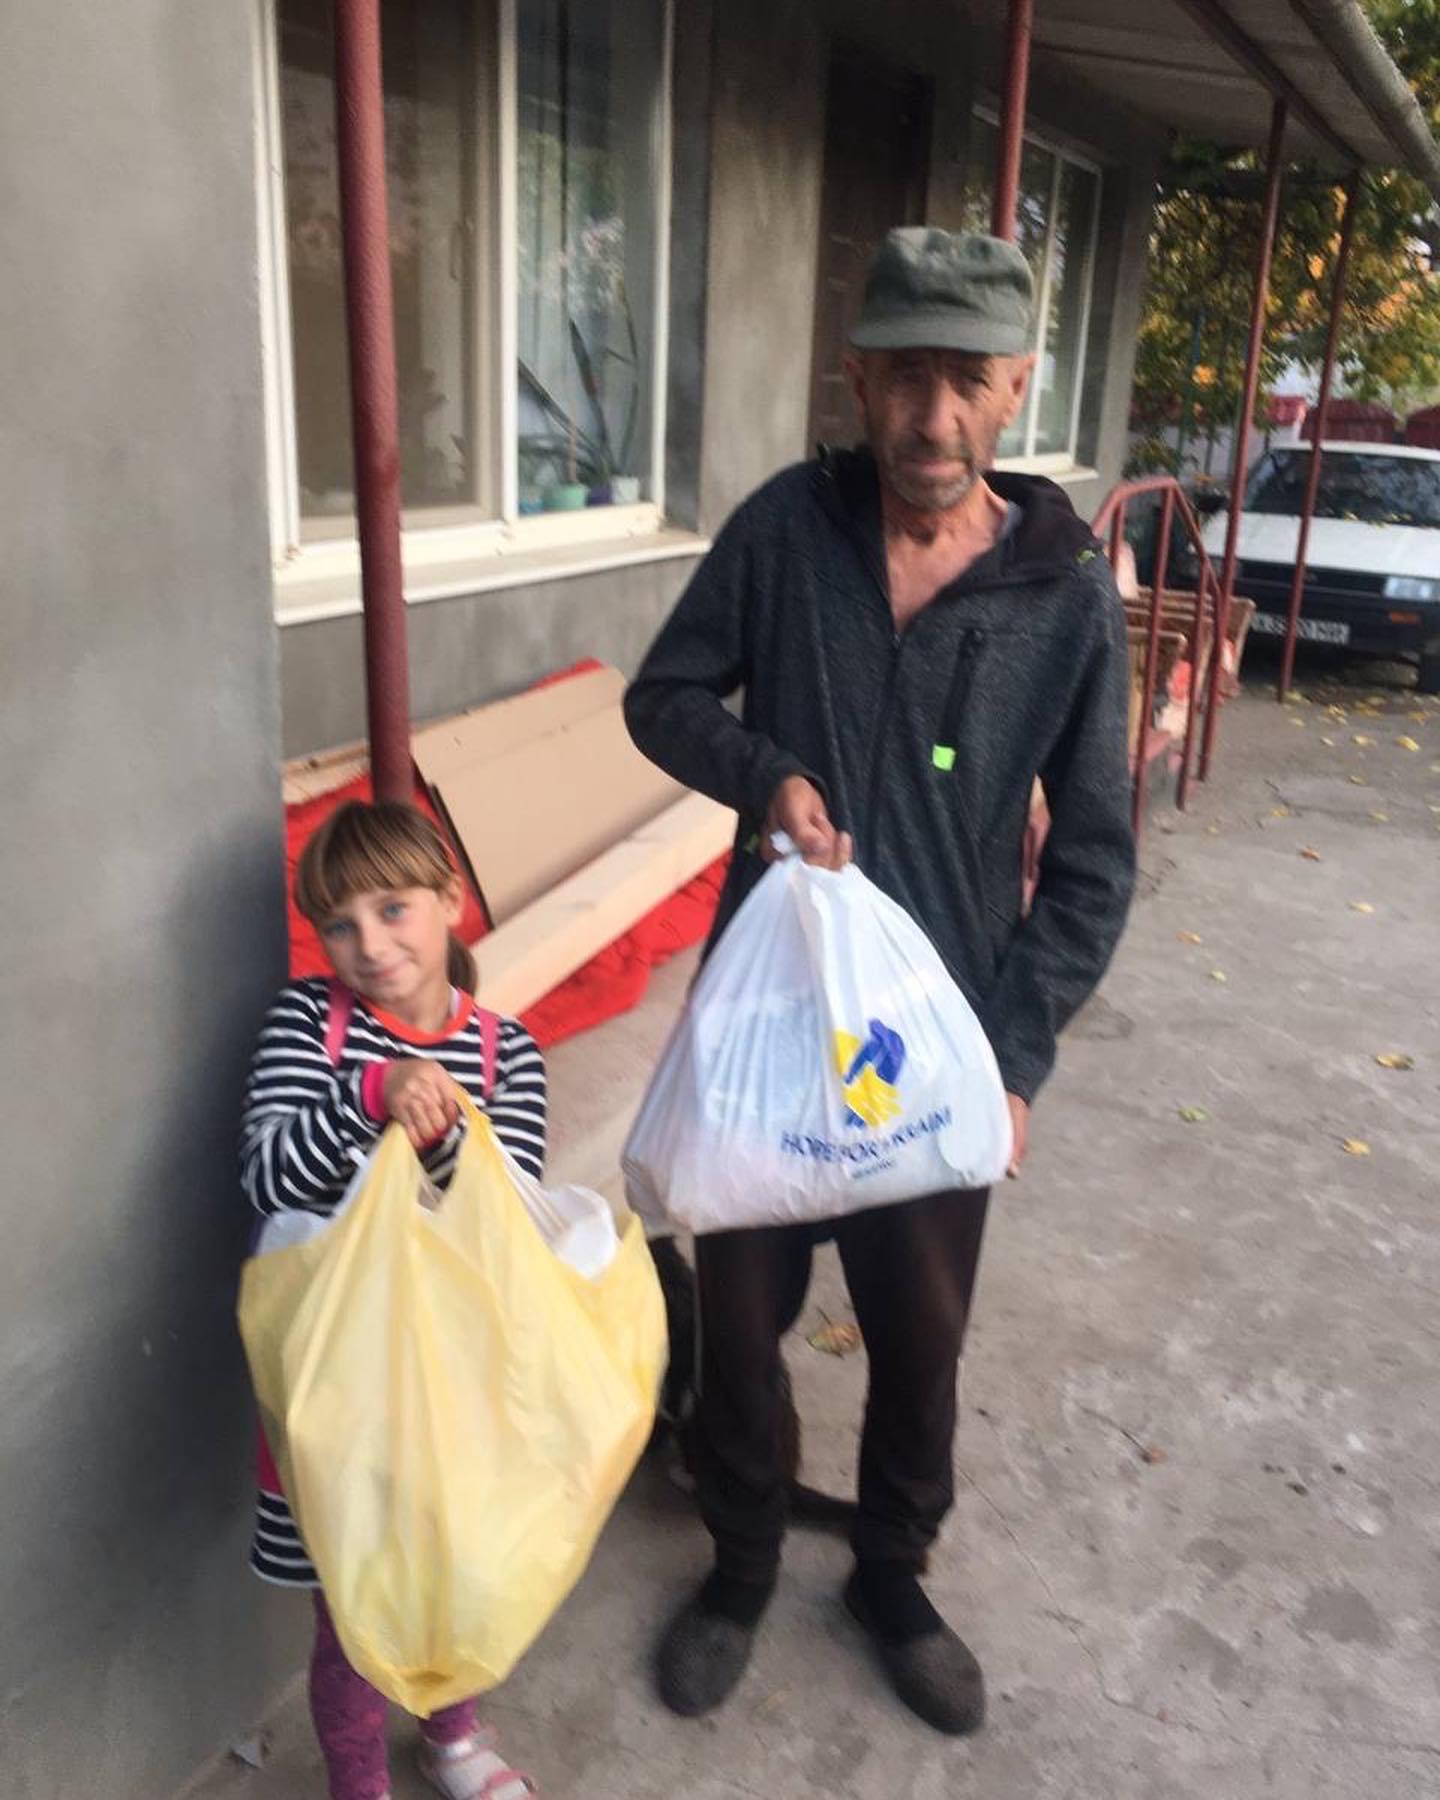 A man and a little girl standing next to each other holding bags.